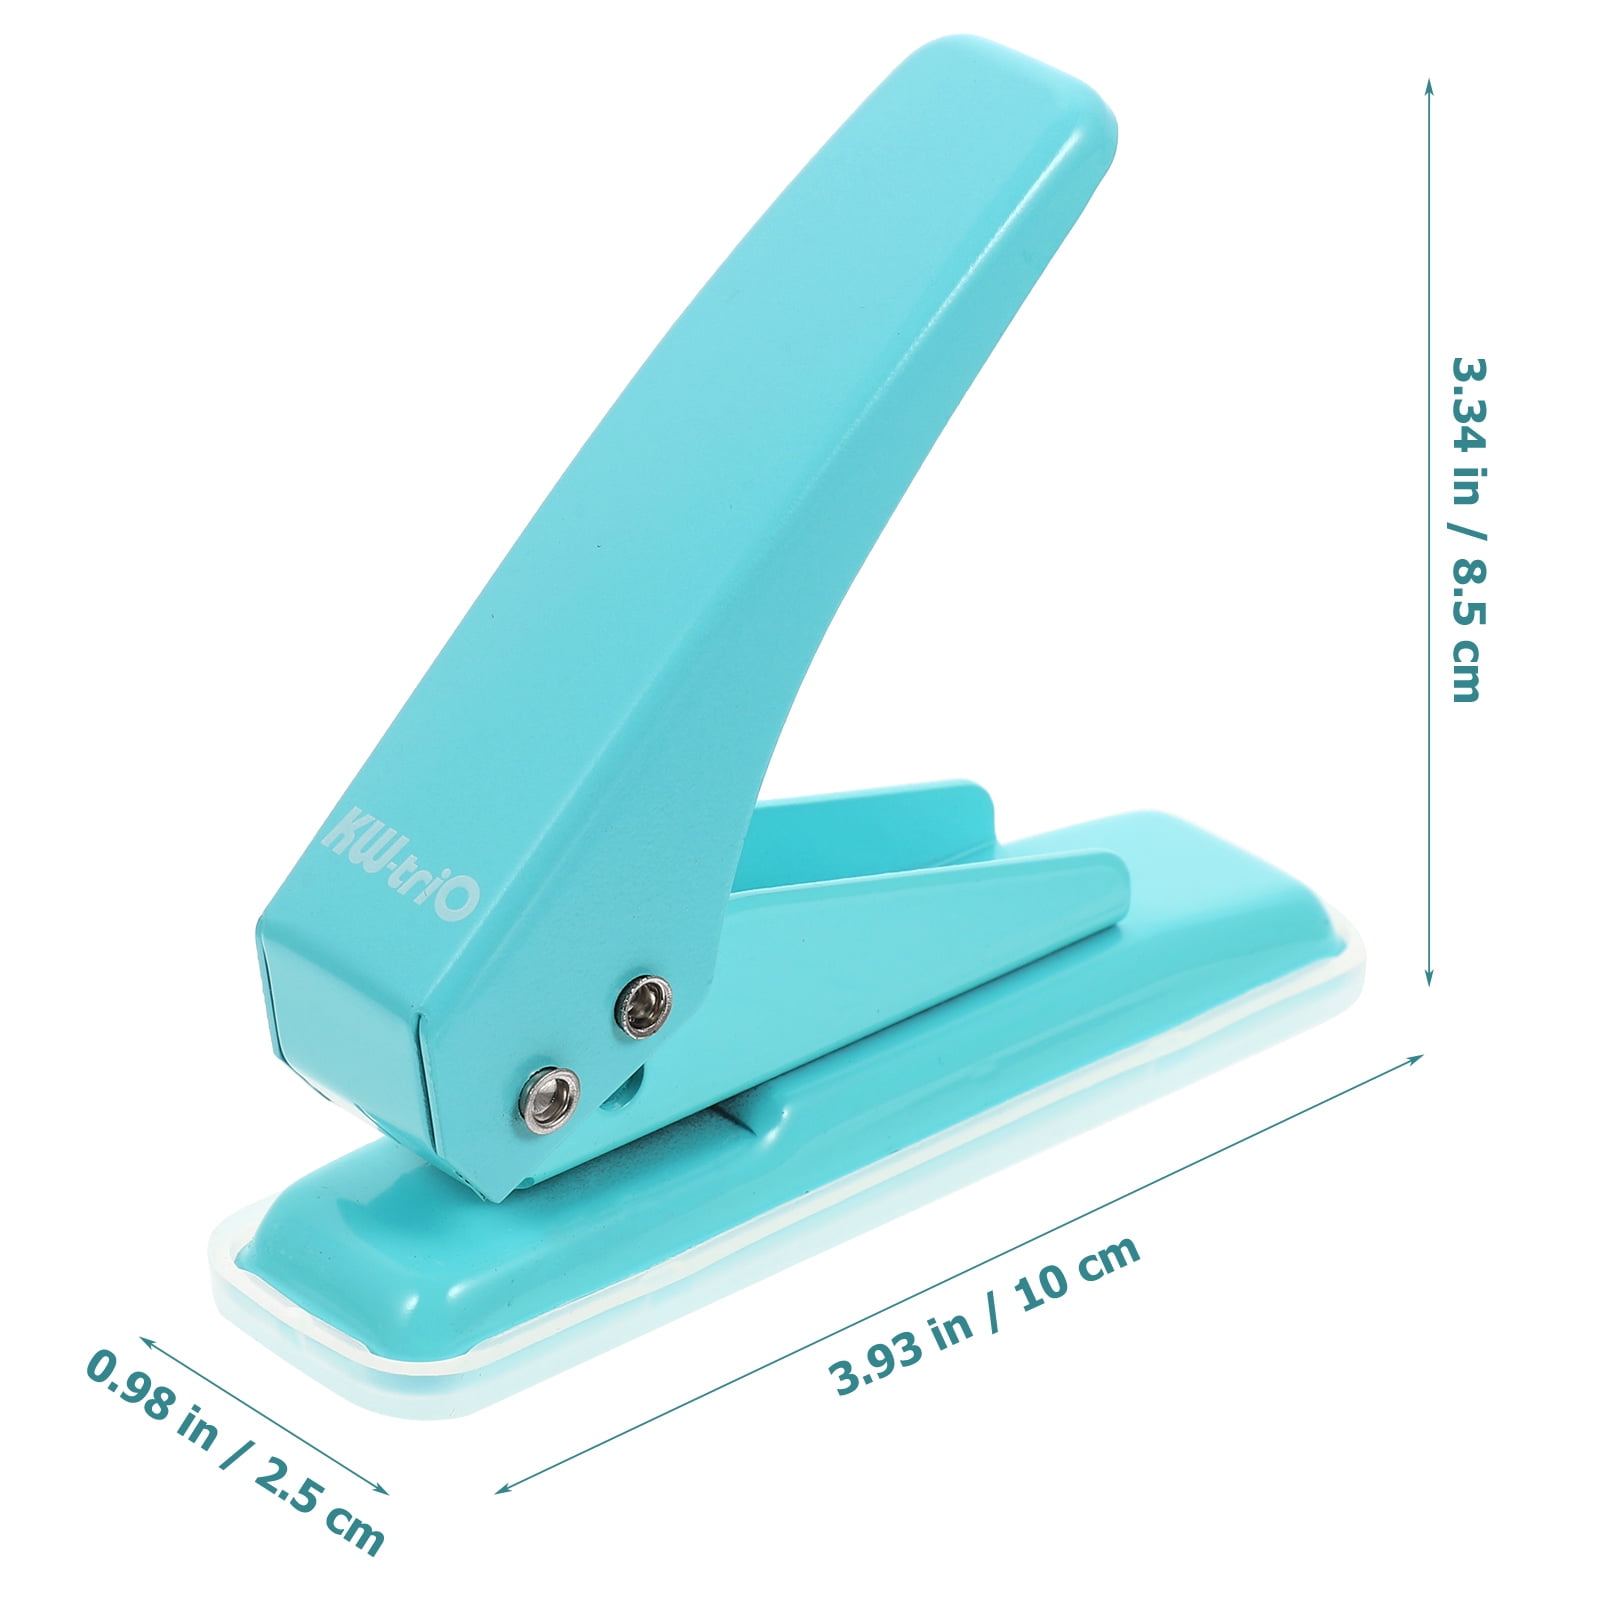 TEHAUX Manual Punch Scrapbooking Tools Heavy Duty Hole Punch Single Hole  Puncher Craft Hole Punch Paper Hole Puncher Circle Paper Punch Portable  Paper